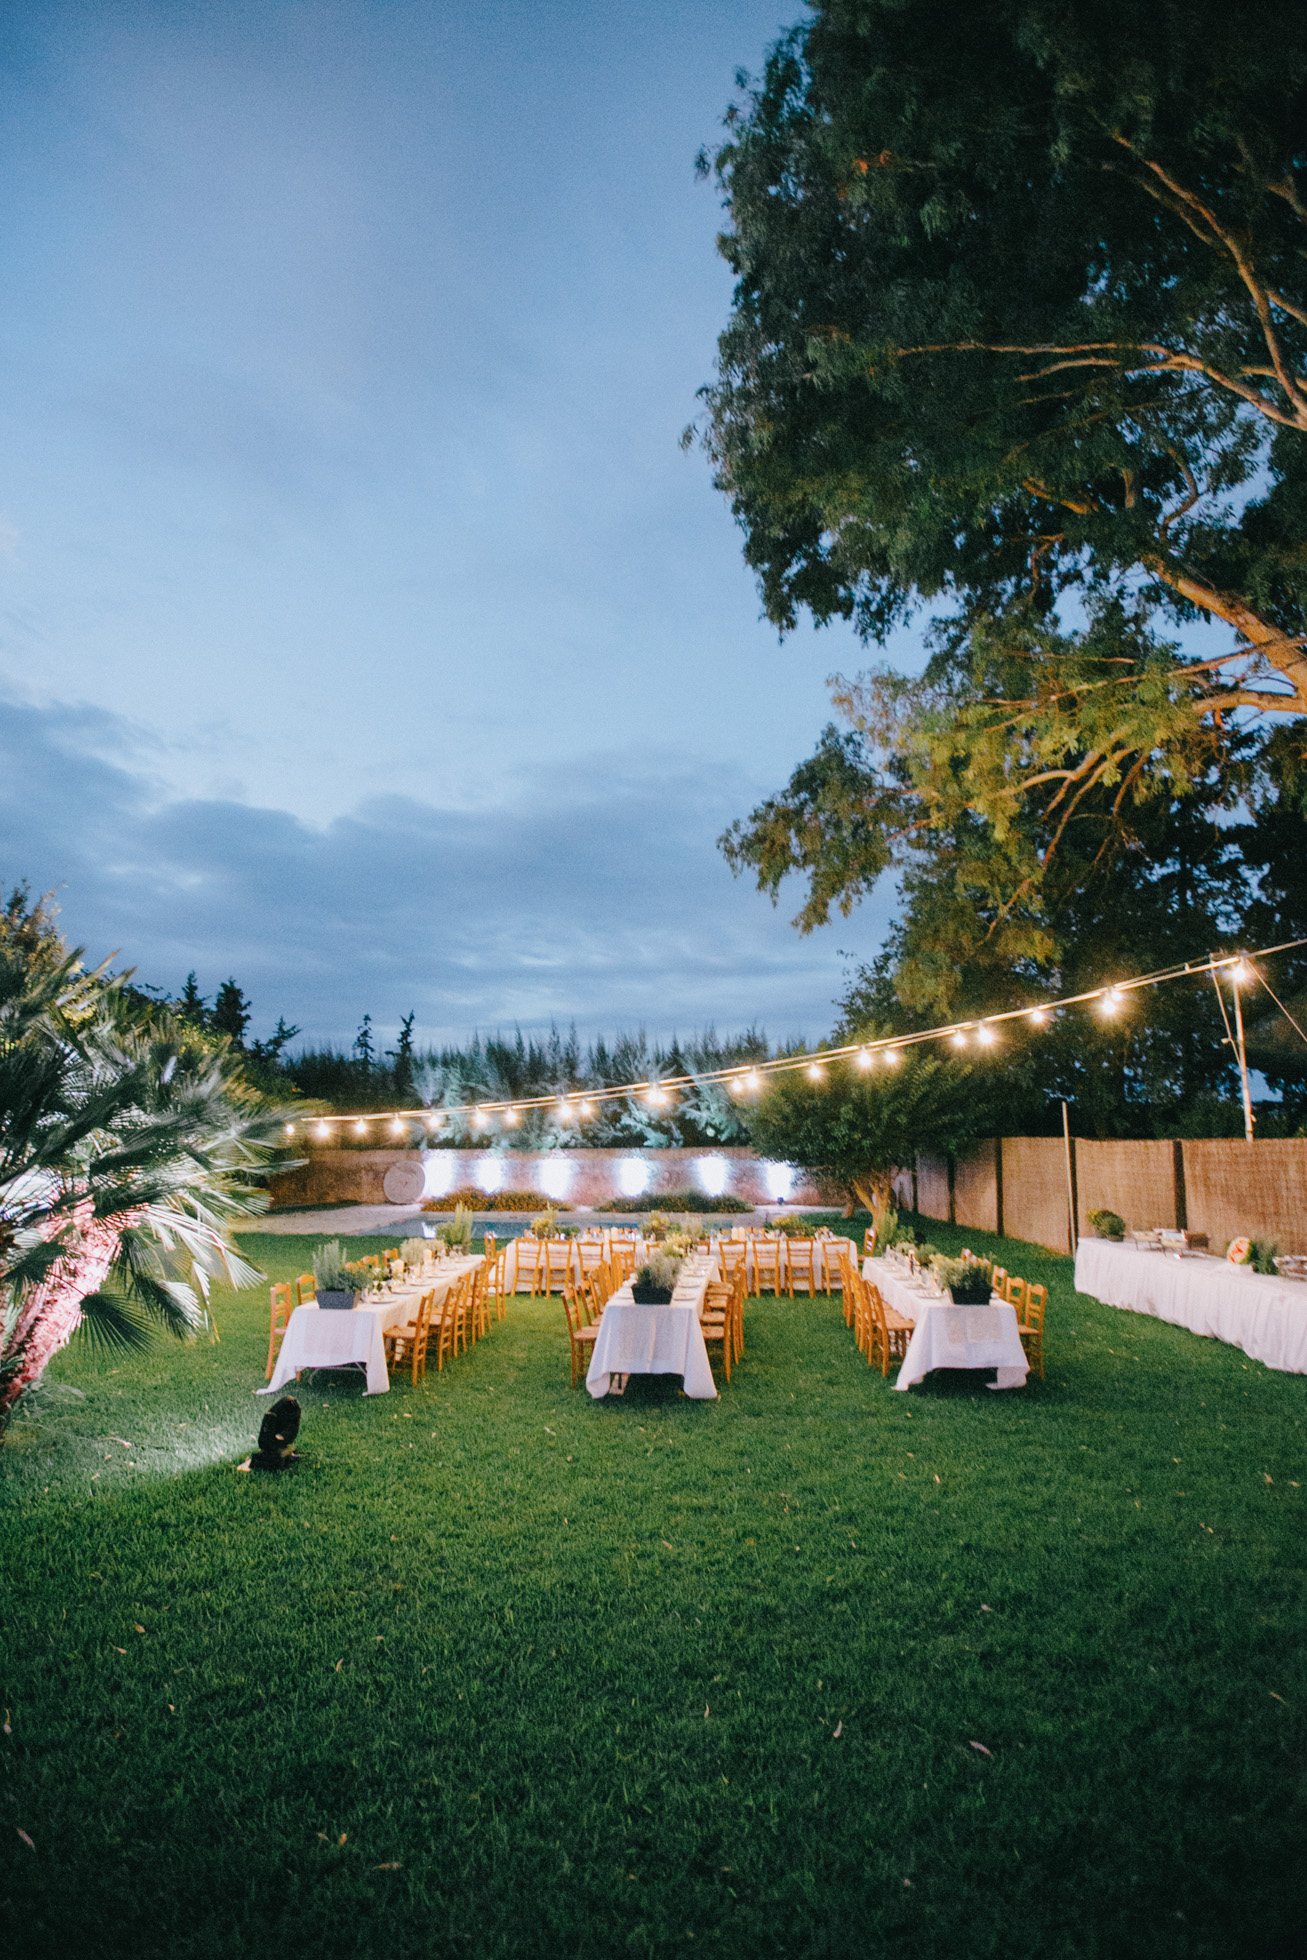 Rich wedding reception dinner setup for an exclusive wedding event in Metohi Kindelis, Chania, Crete photographed by professional photographer team.